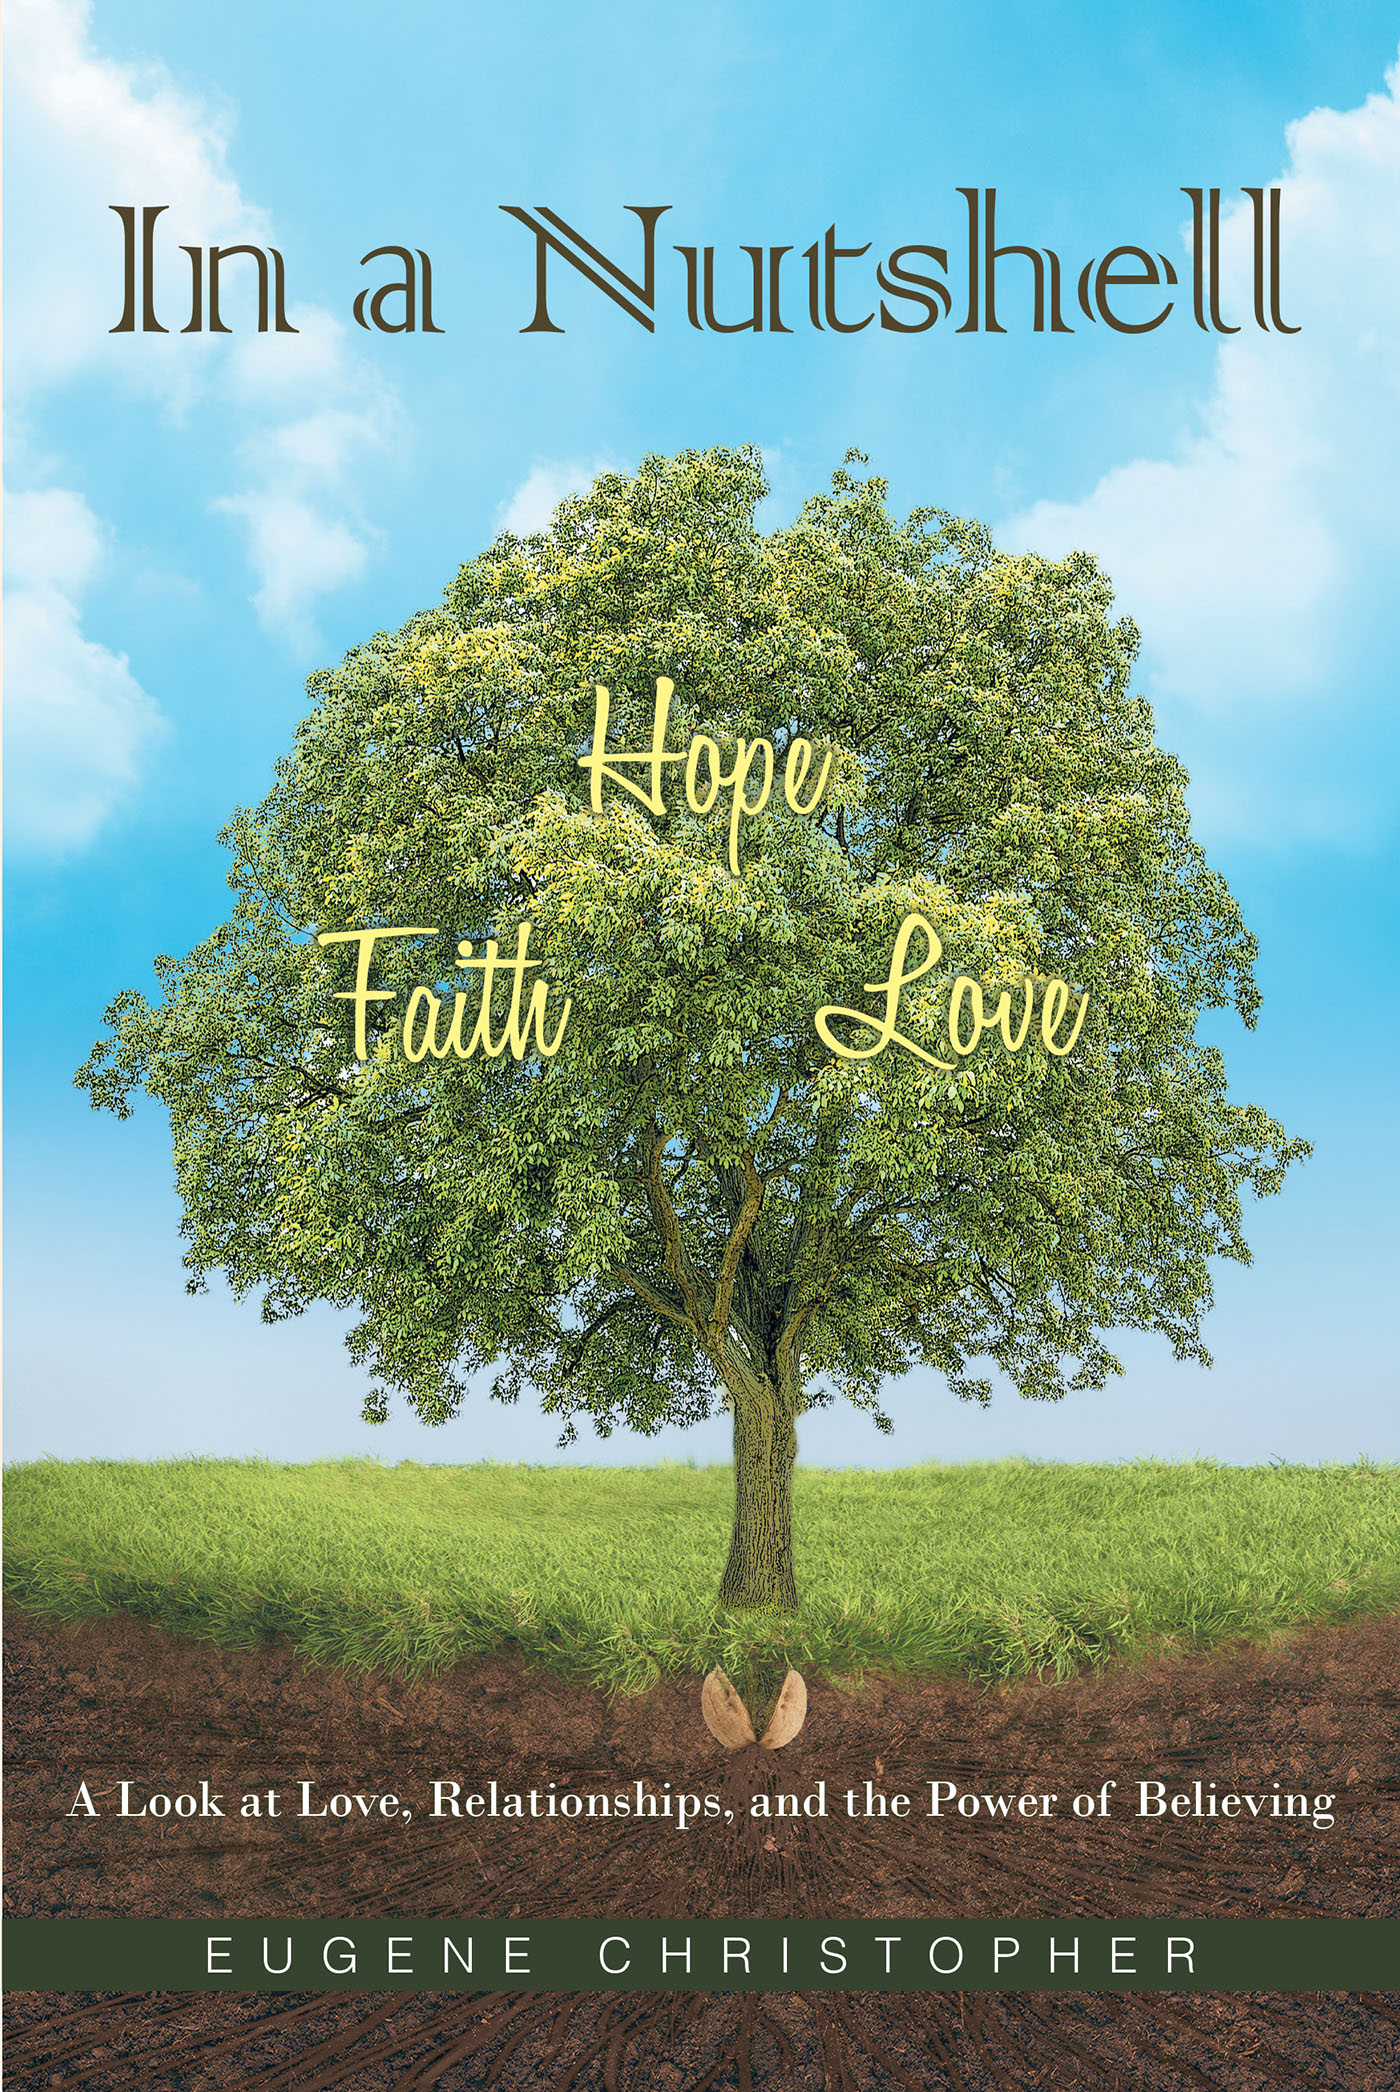 Eugene Christopher’s Newly Released "In a Nutshell Faith, Hope, Love" is an Engaging Discussion of Key Virtues That Guide Our Lives